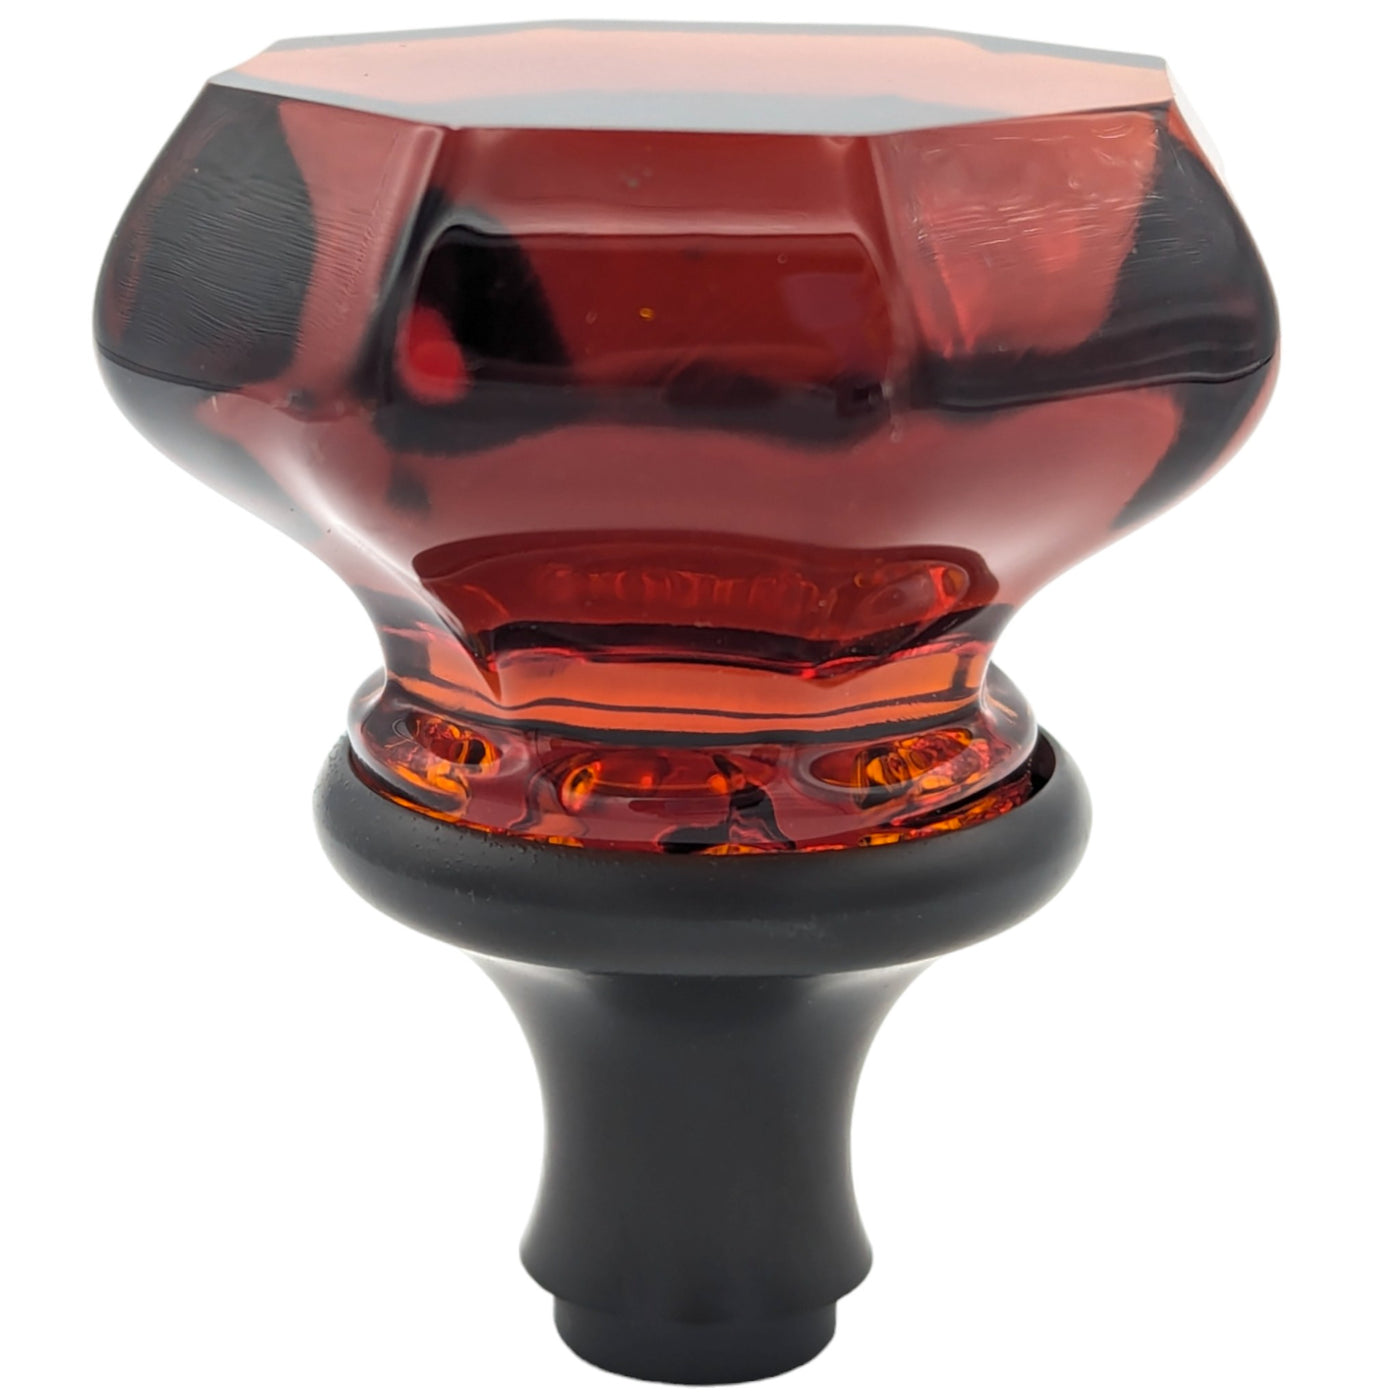 Amber Octagon Crystal Spare Door Knob Set (Several Finishes Available)